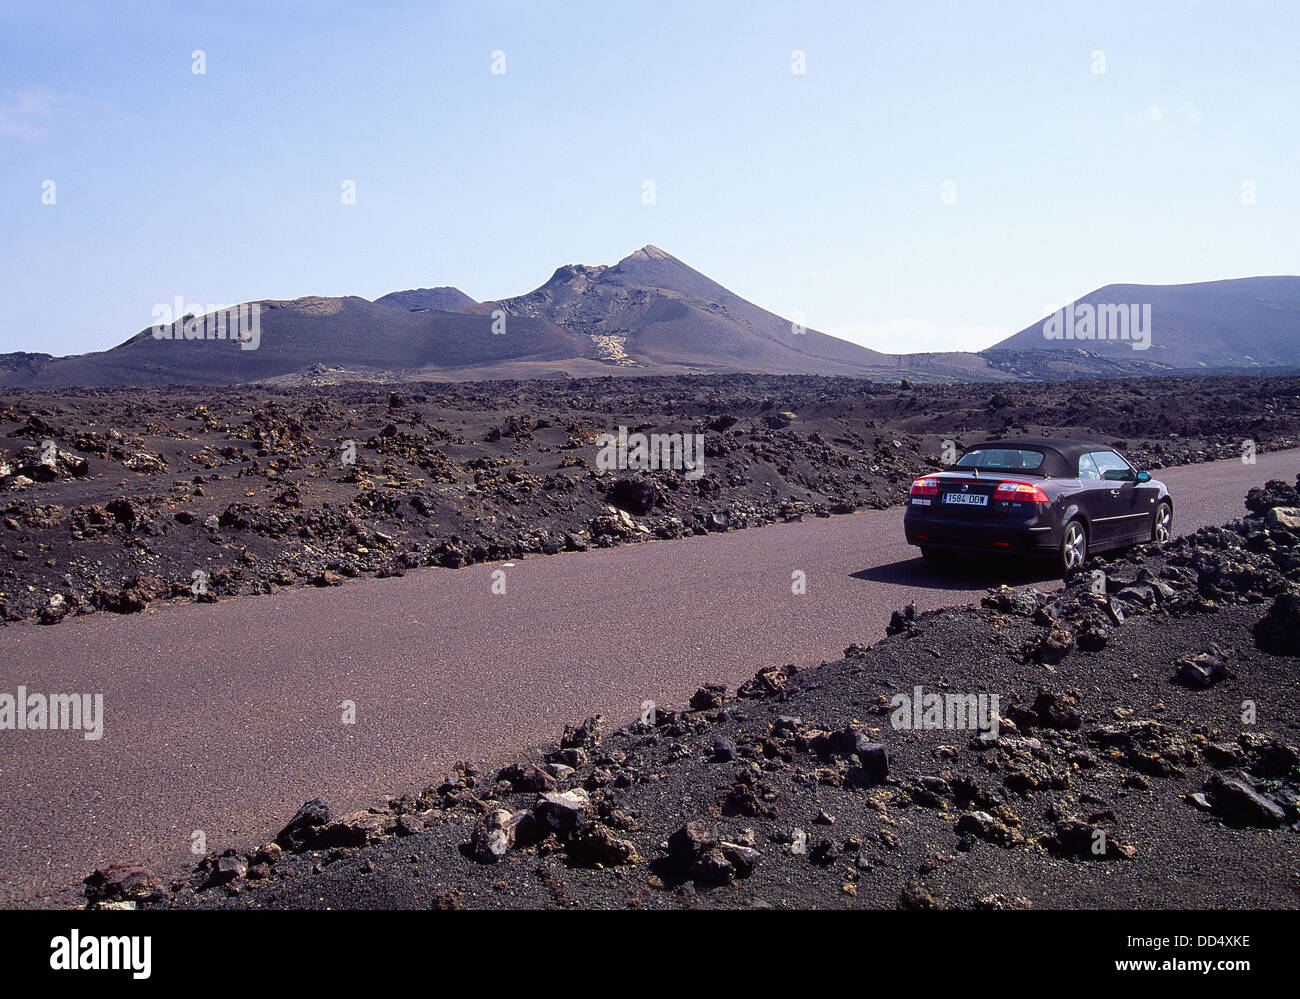 Car stopped on road. Timanfaya National Park, Lanzarote island, Canary Islands, Spain. Stock Photo